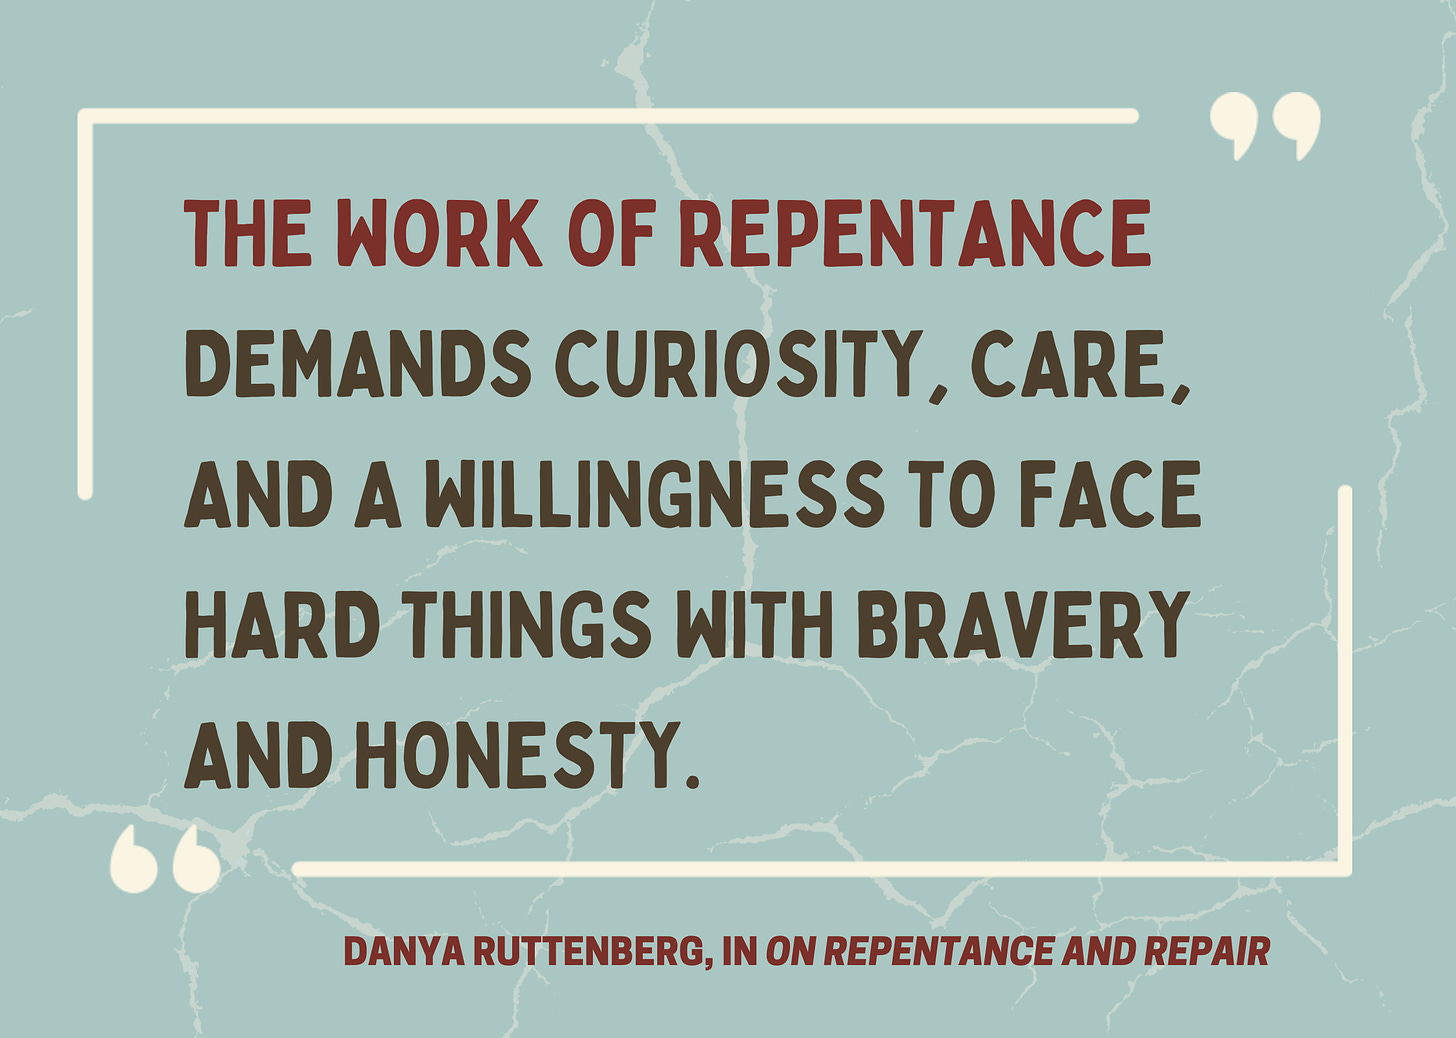 The work of repentance demands curiosity, care, and a willingness to face hard things with bravery and honesty.